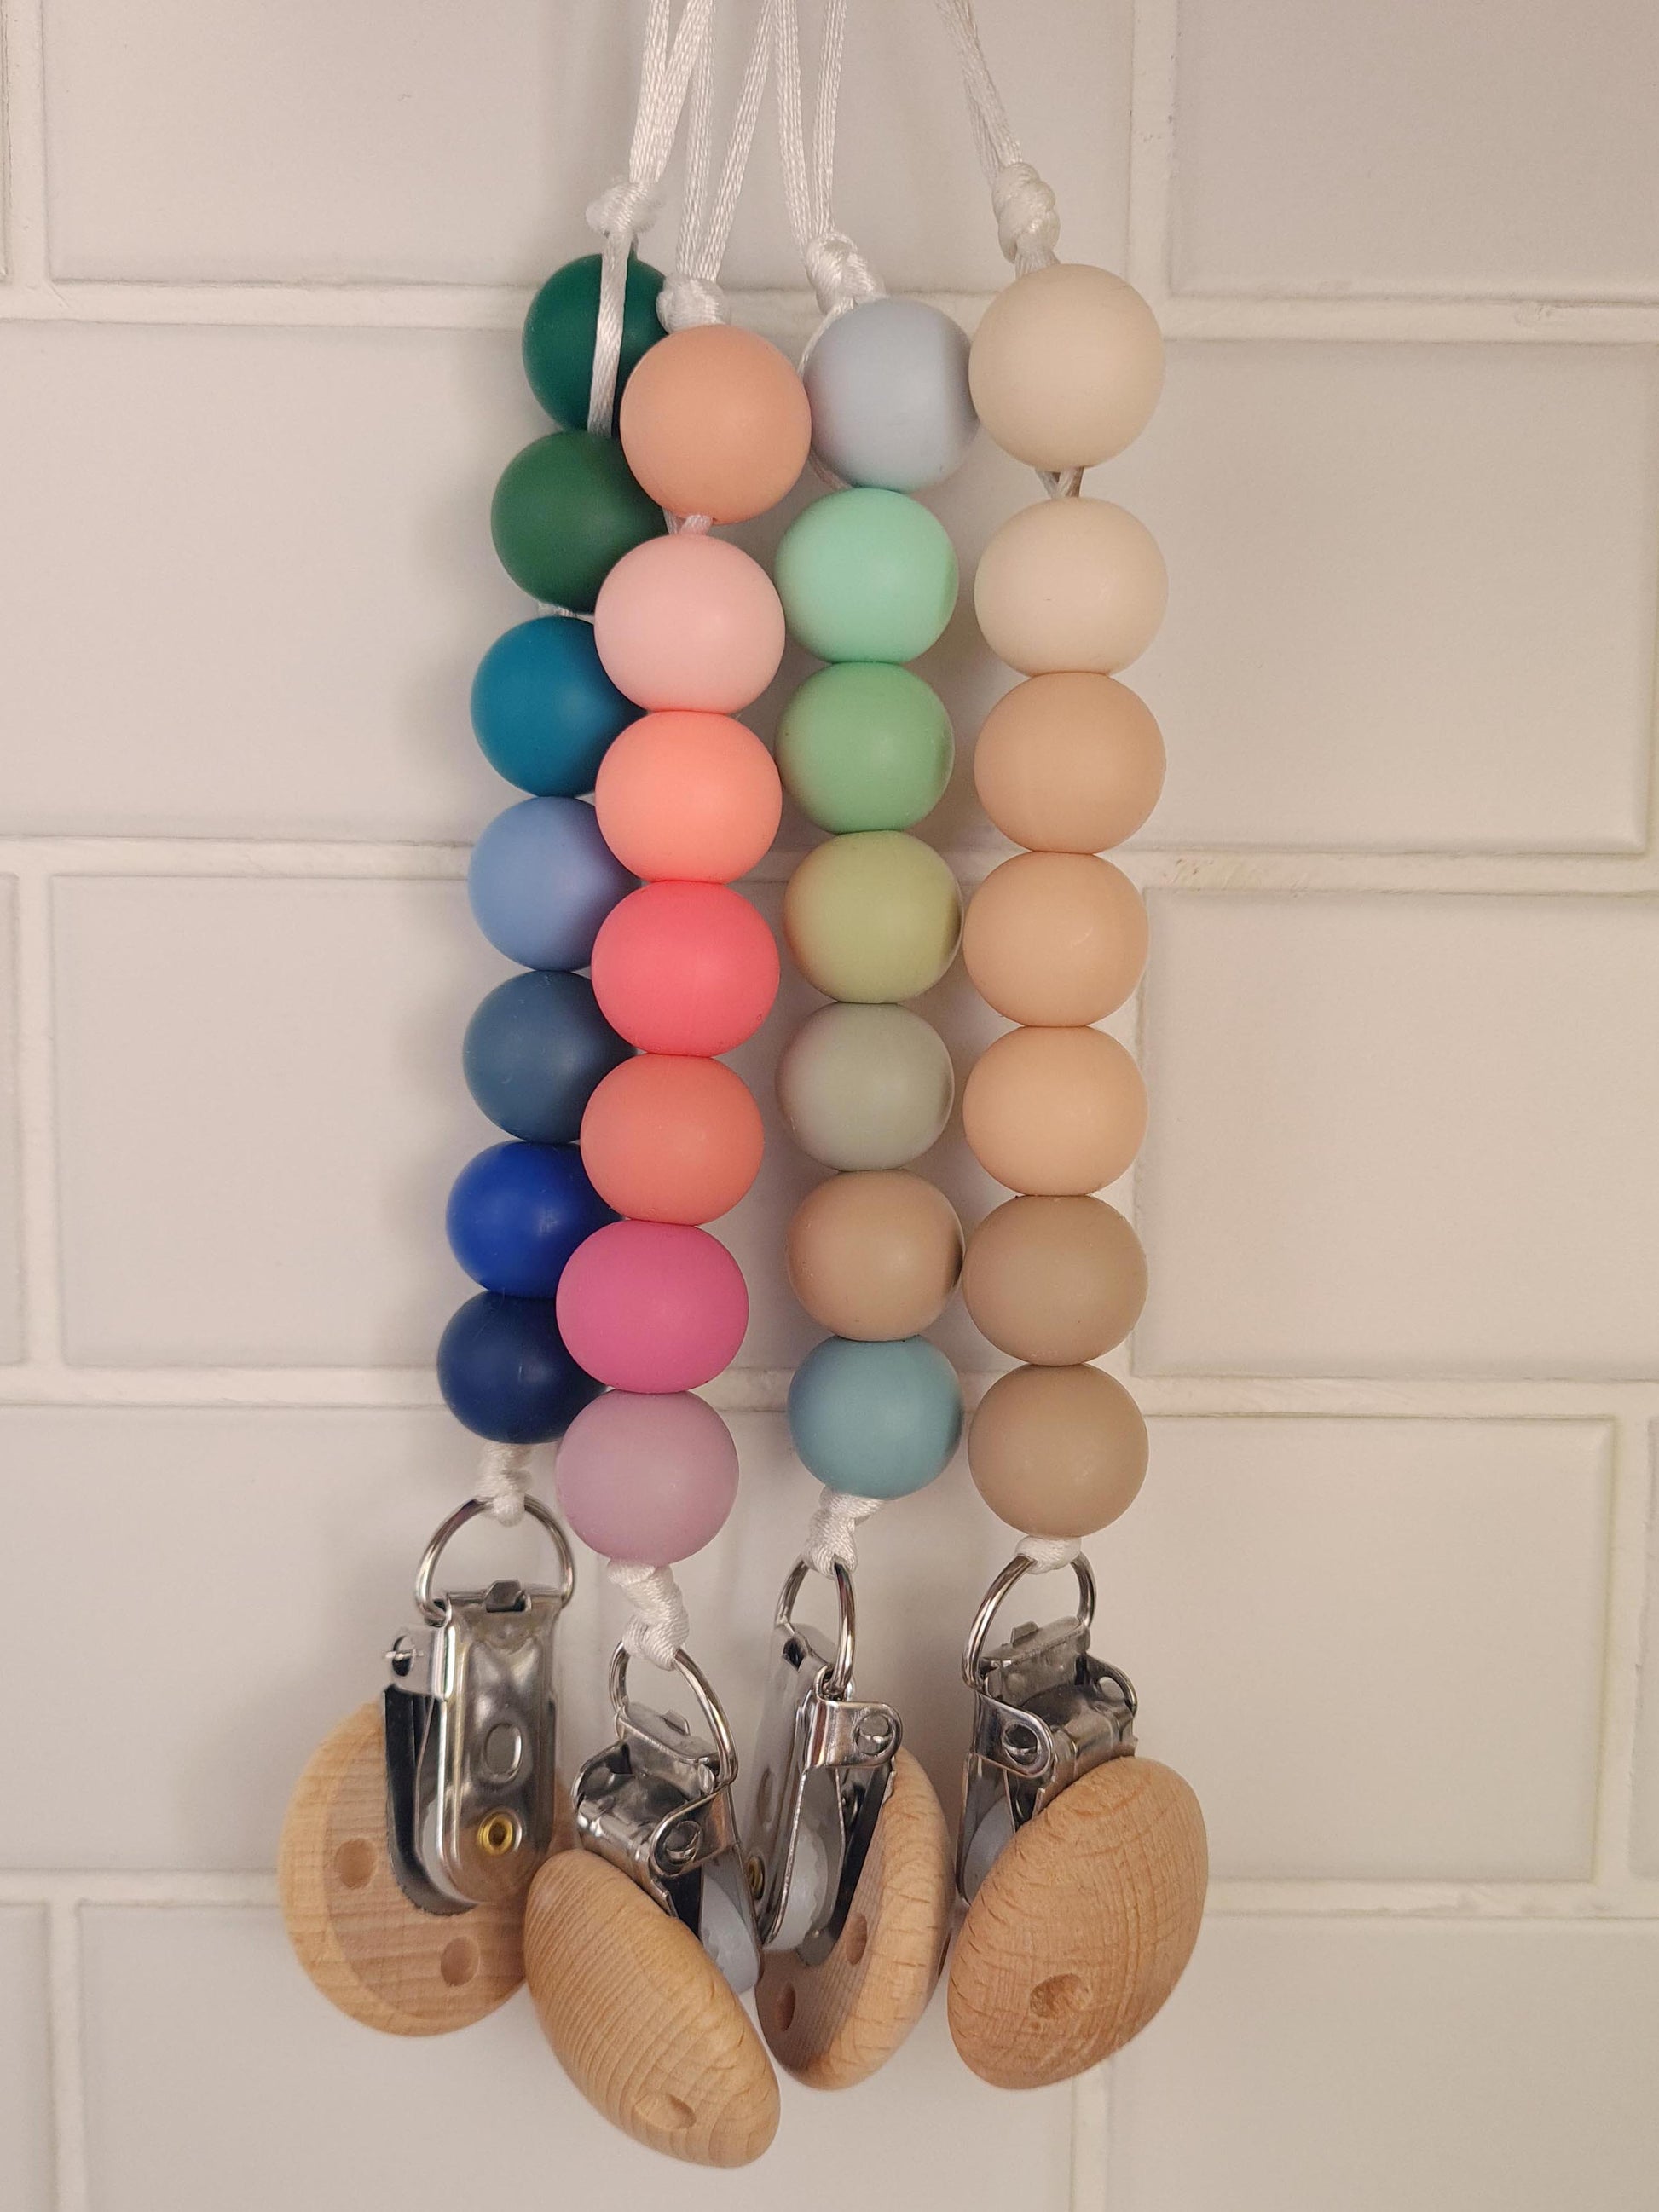 The Nibbly Neapolitan soother clip is a good handmade gift idea for newborns or toddlers. Perfect for the sweet hearts who love Neapolitan Ice Cream!